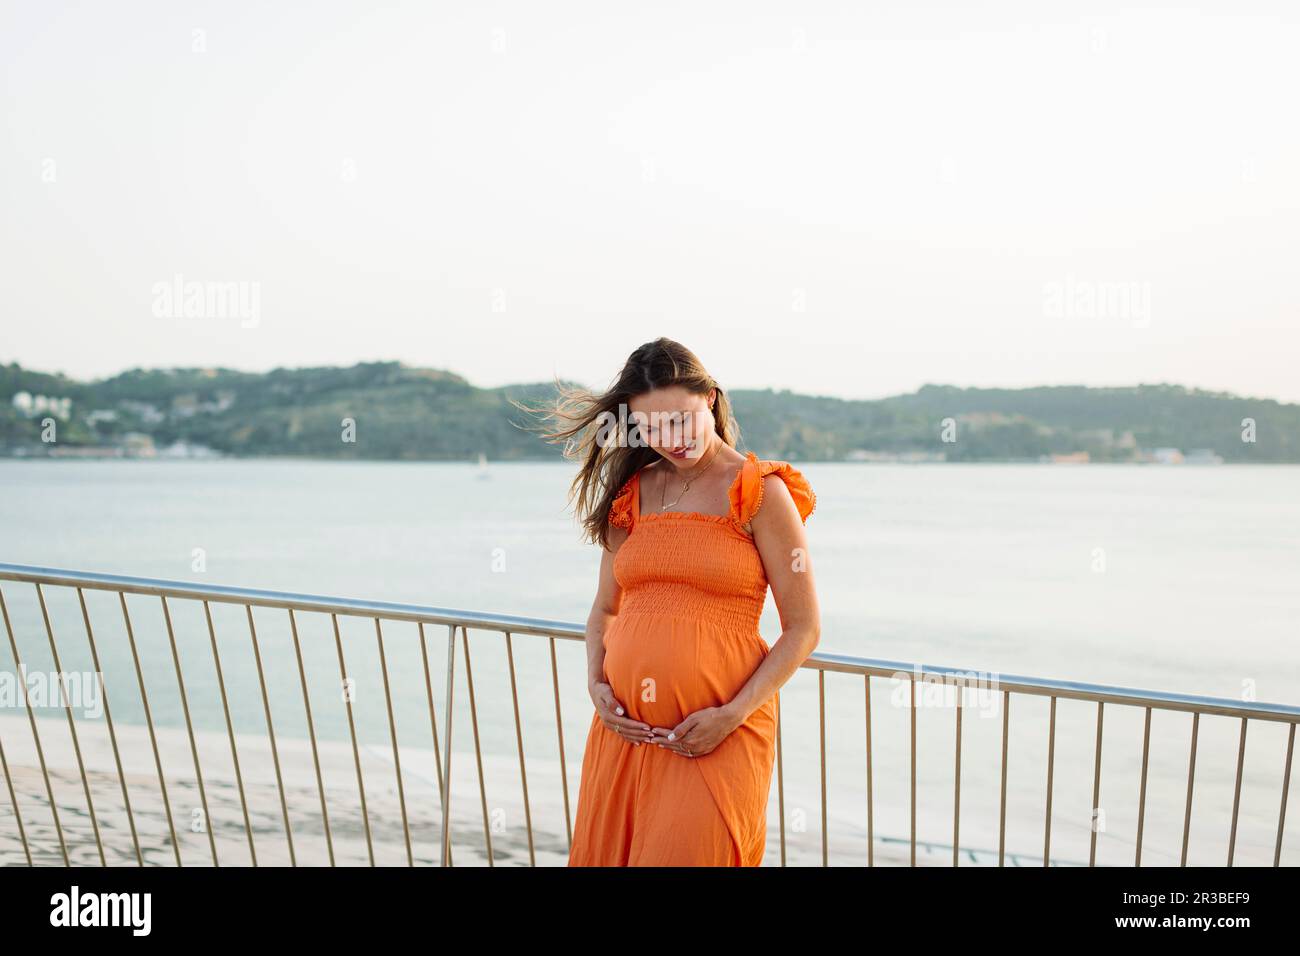 Smiling pregnant woman with hands on stomach by railing Stock Photo